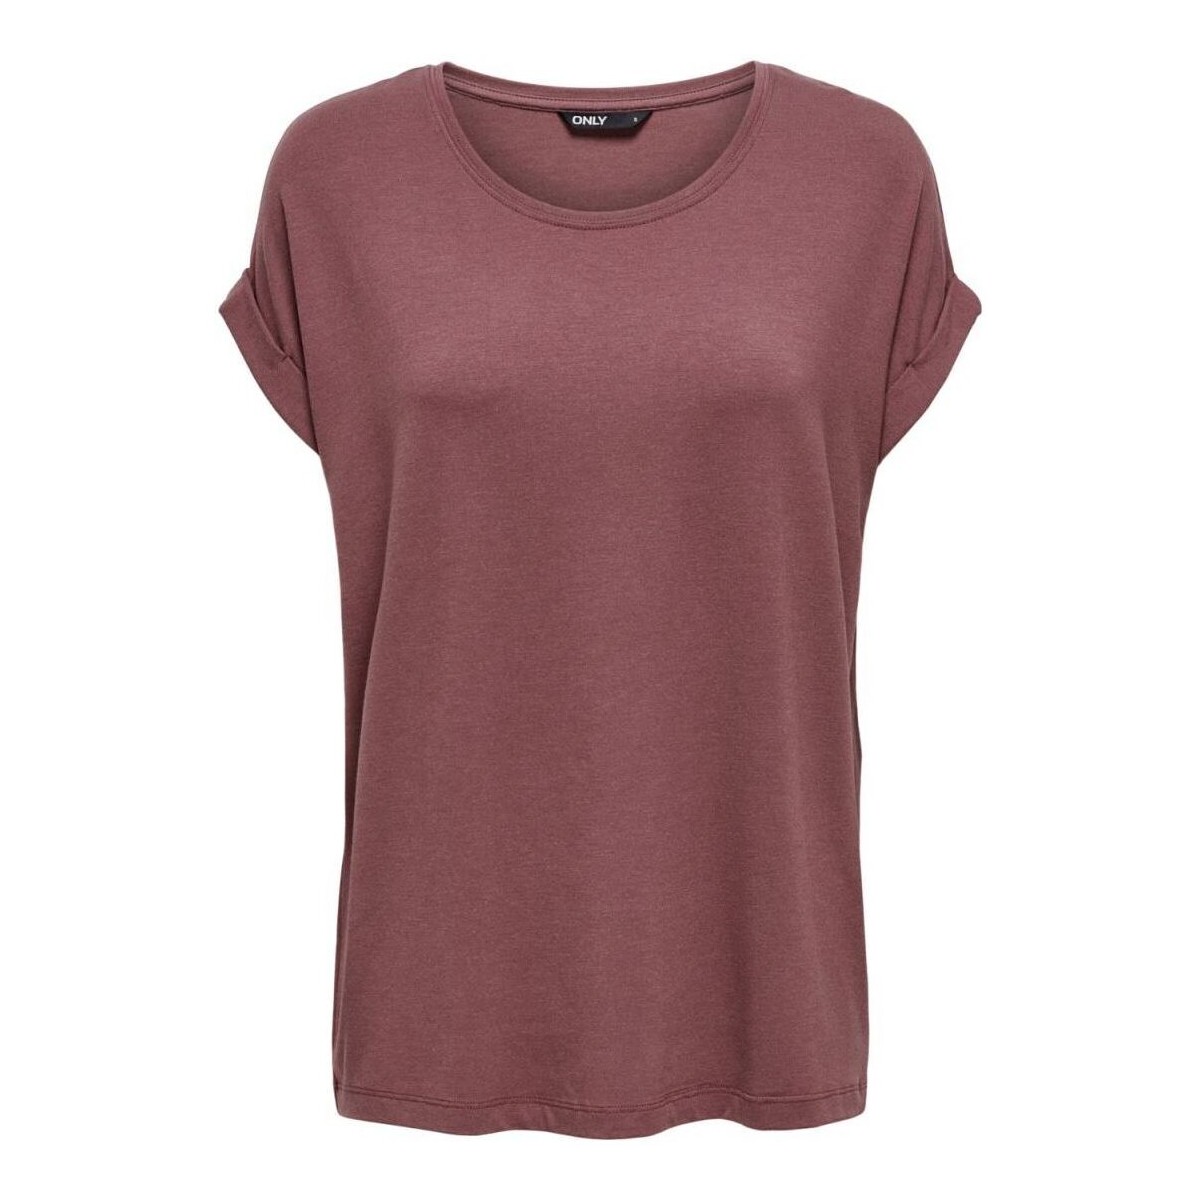 Vêtements Femme T-shirts & Polos Only 15106662 MONSTER-ROSE BROWN Rouge